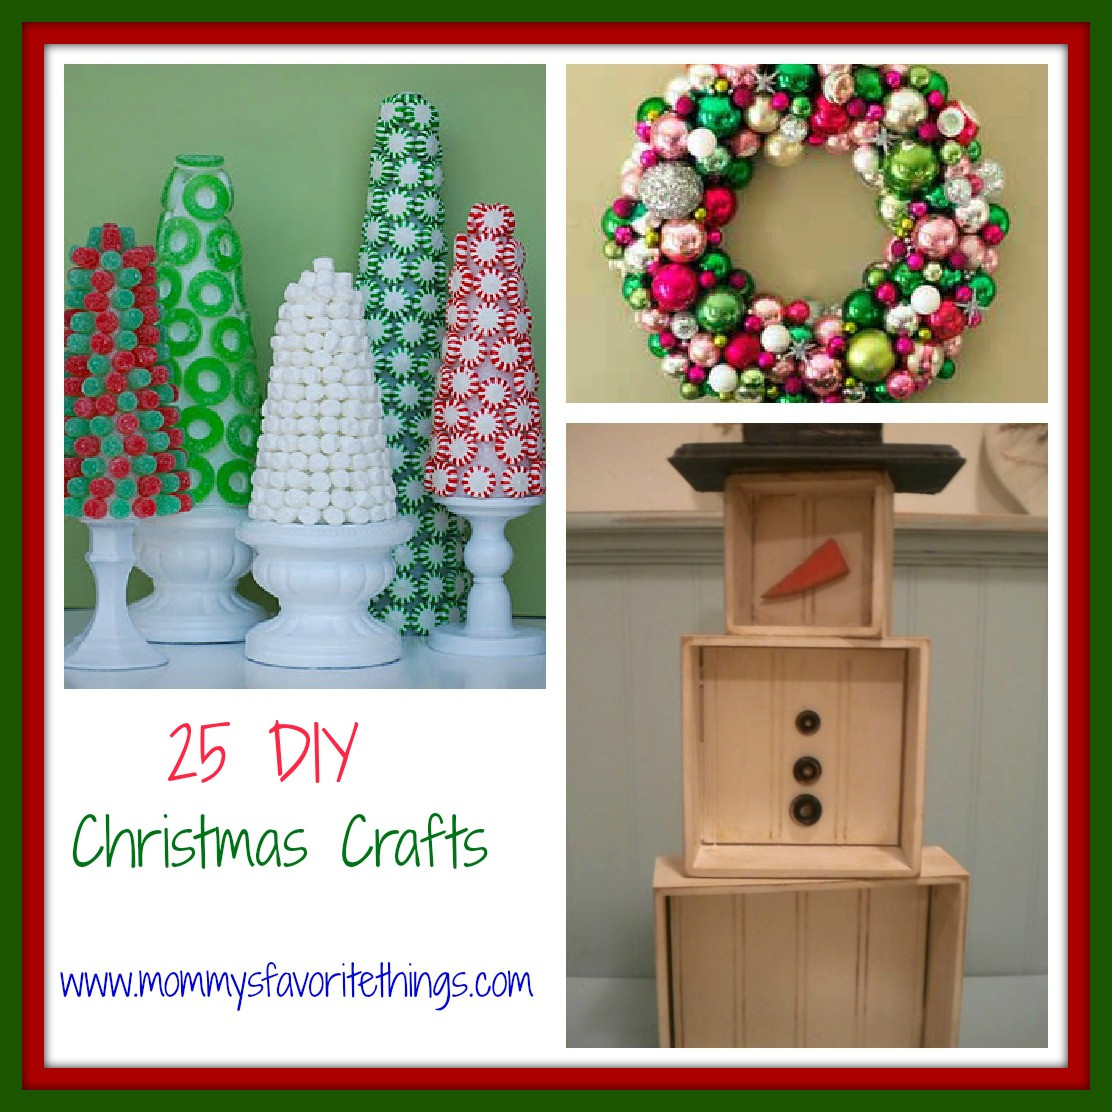 Best ideas about Christmas Crafts DIY
. Save or Pin Mommy s Favorite Things 25 DIY Christmas Crafts Now.